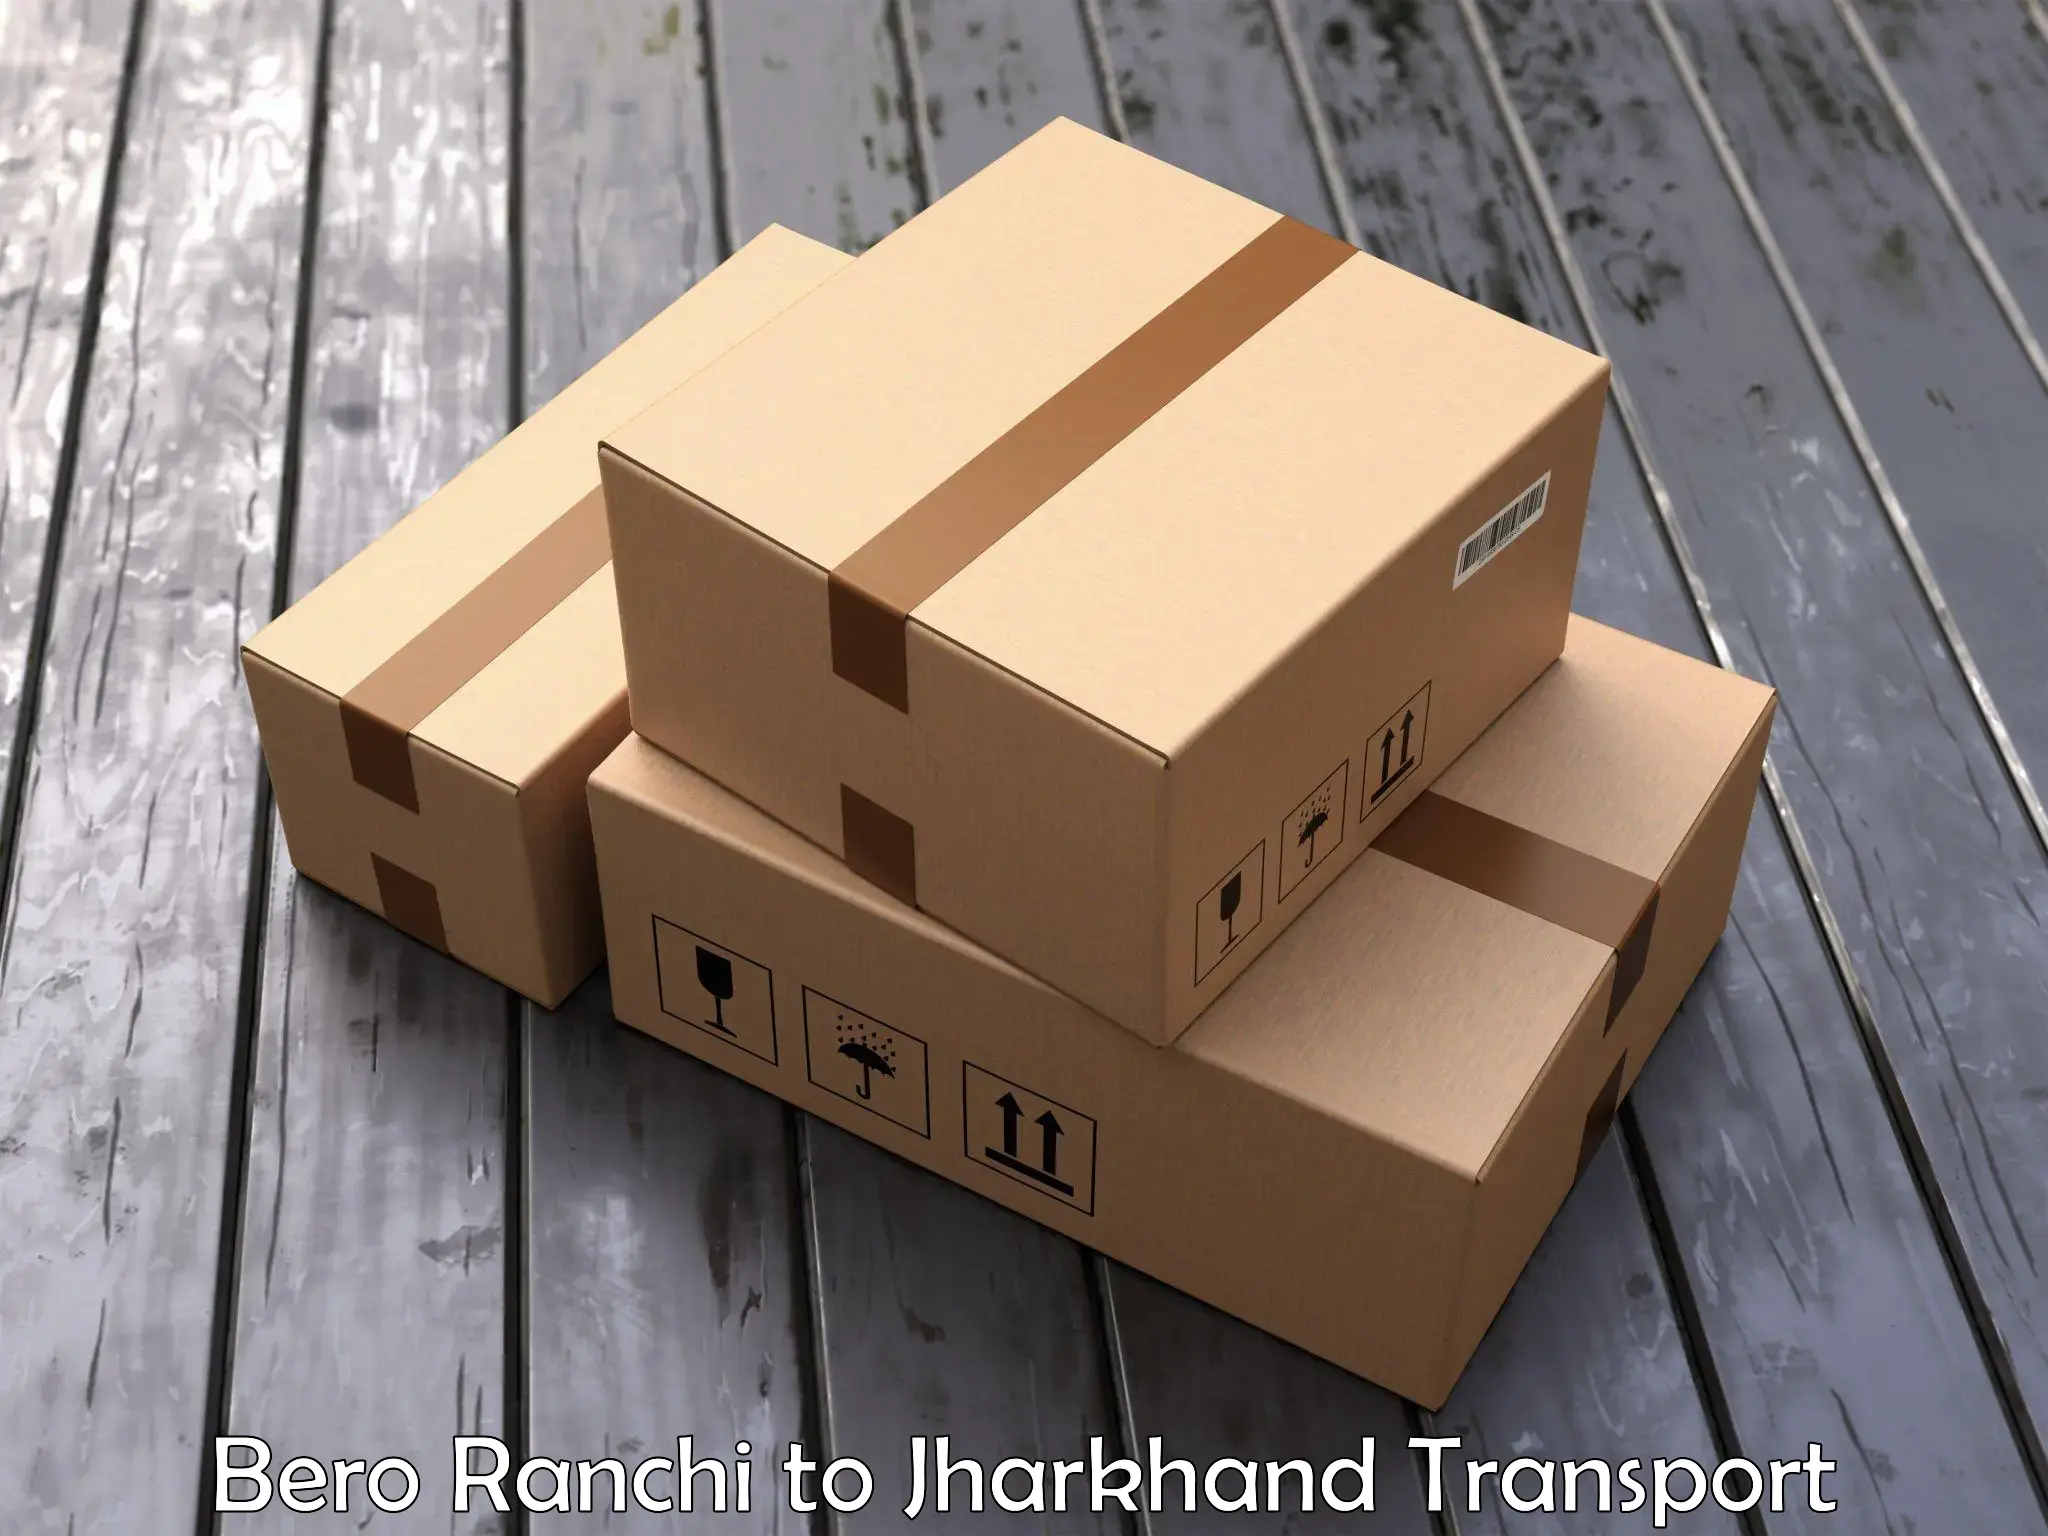 Road transport online services Bero Ranchi to Jharkhand